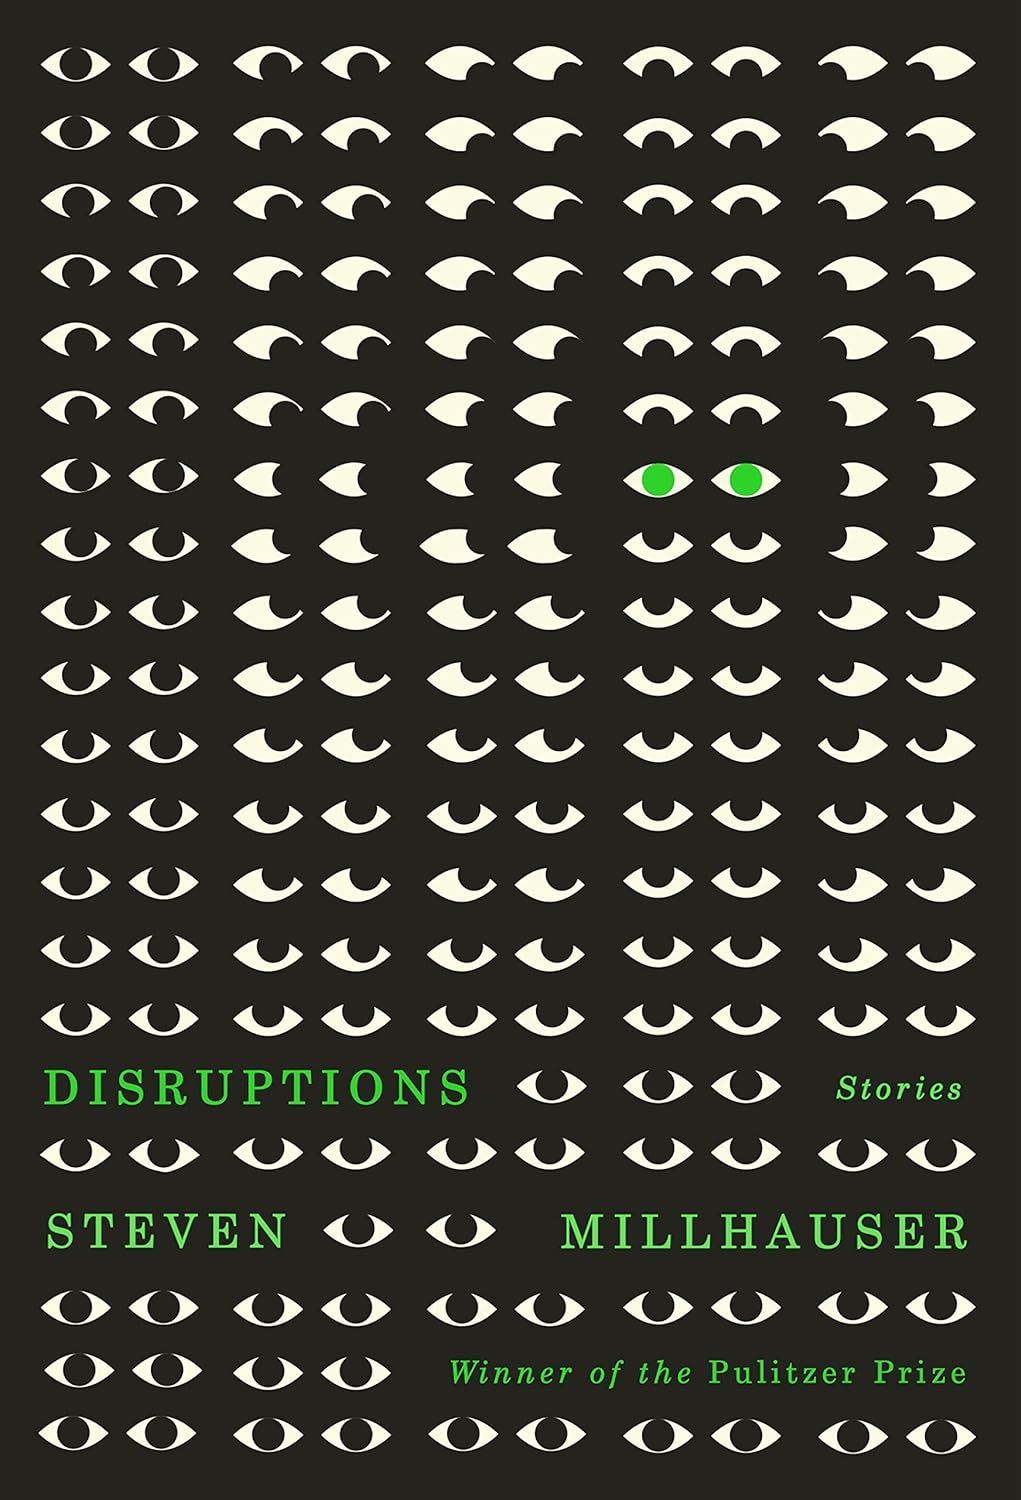 Worlds Within Worlds: A Conversation with Steven Millhauser